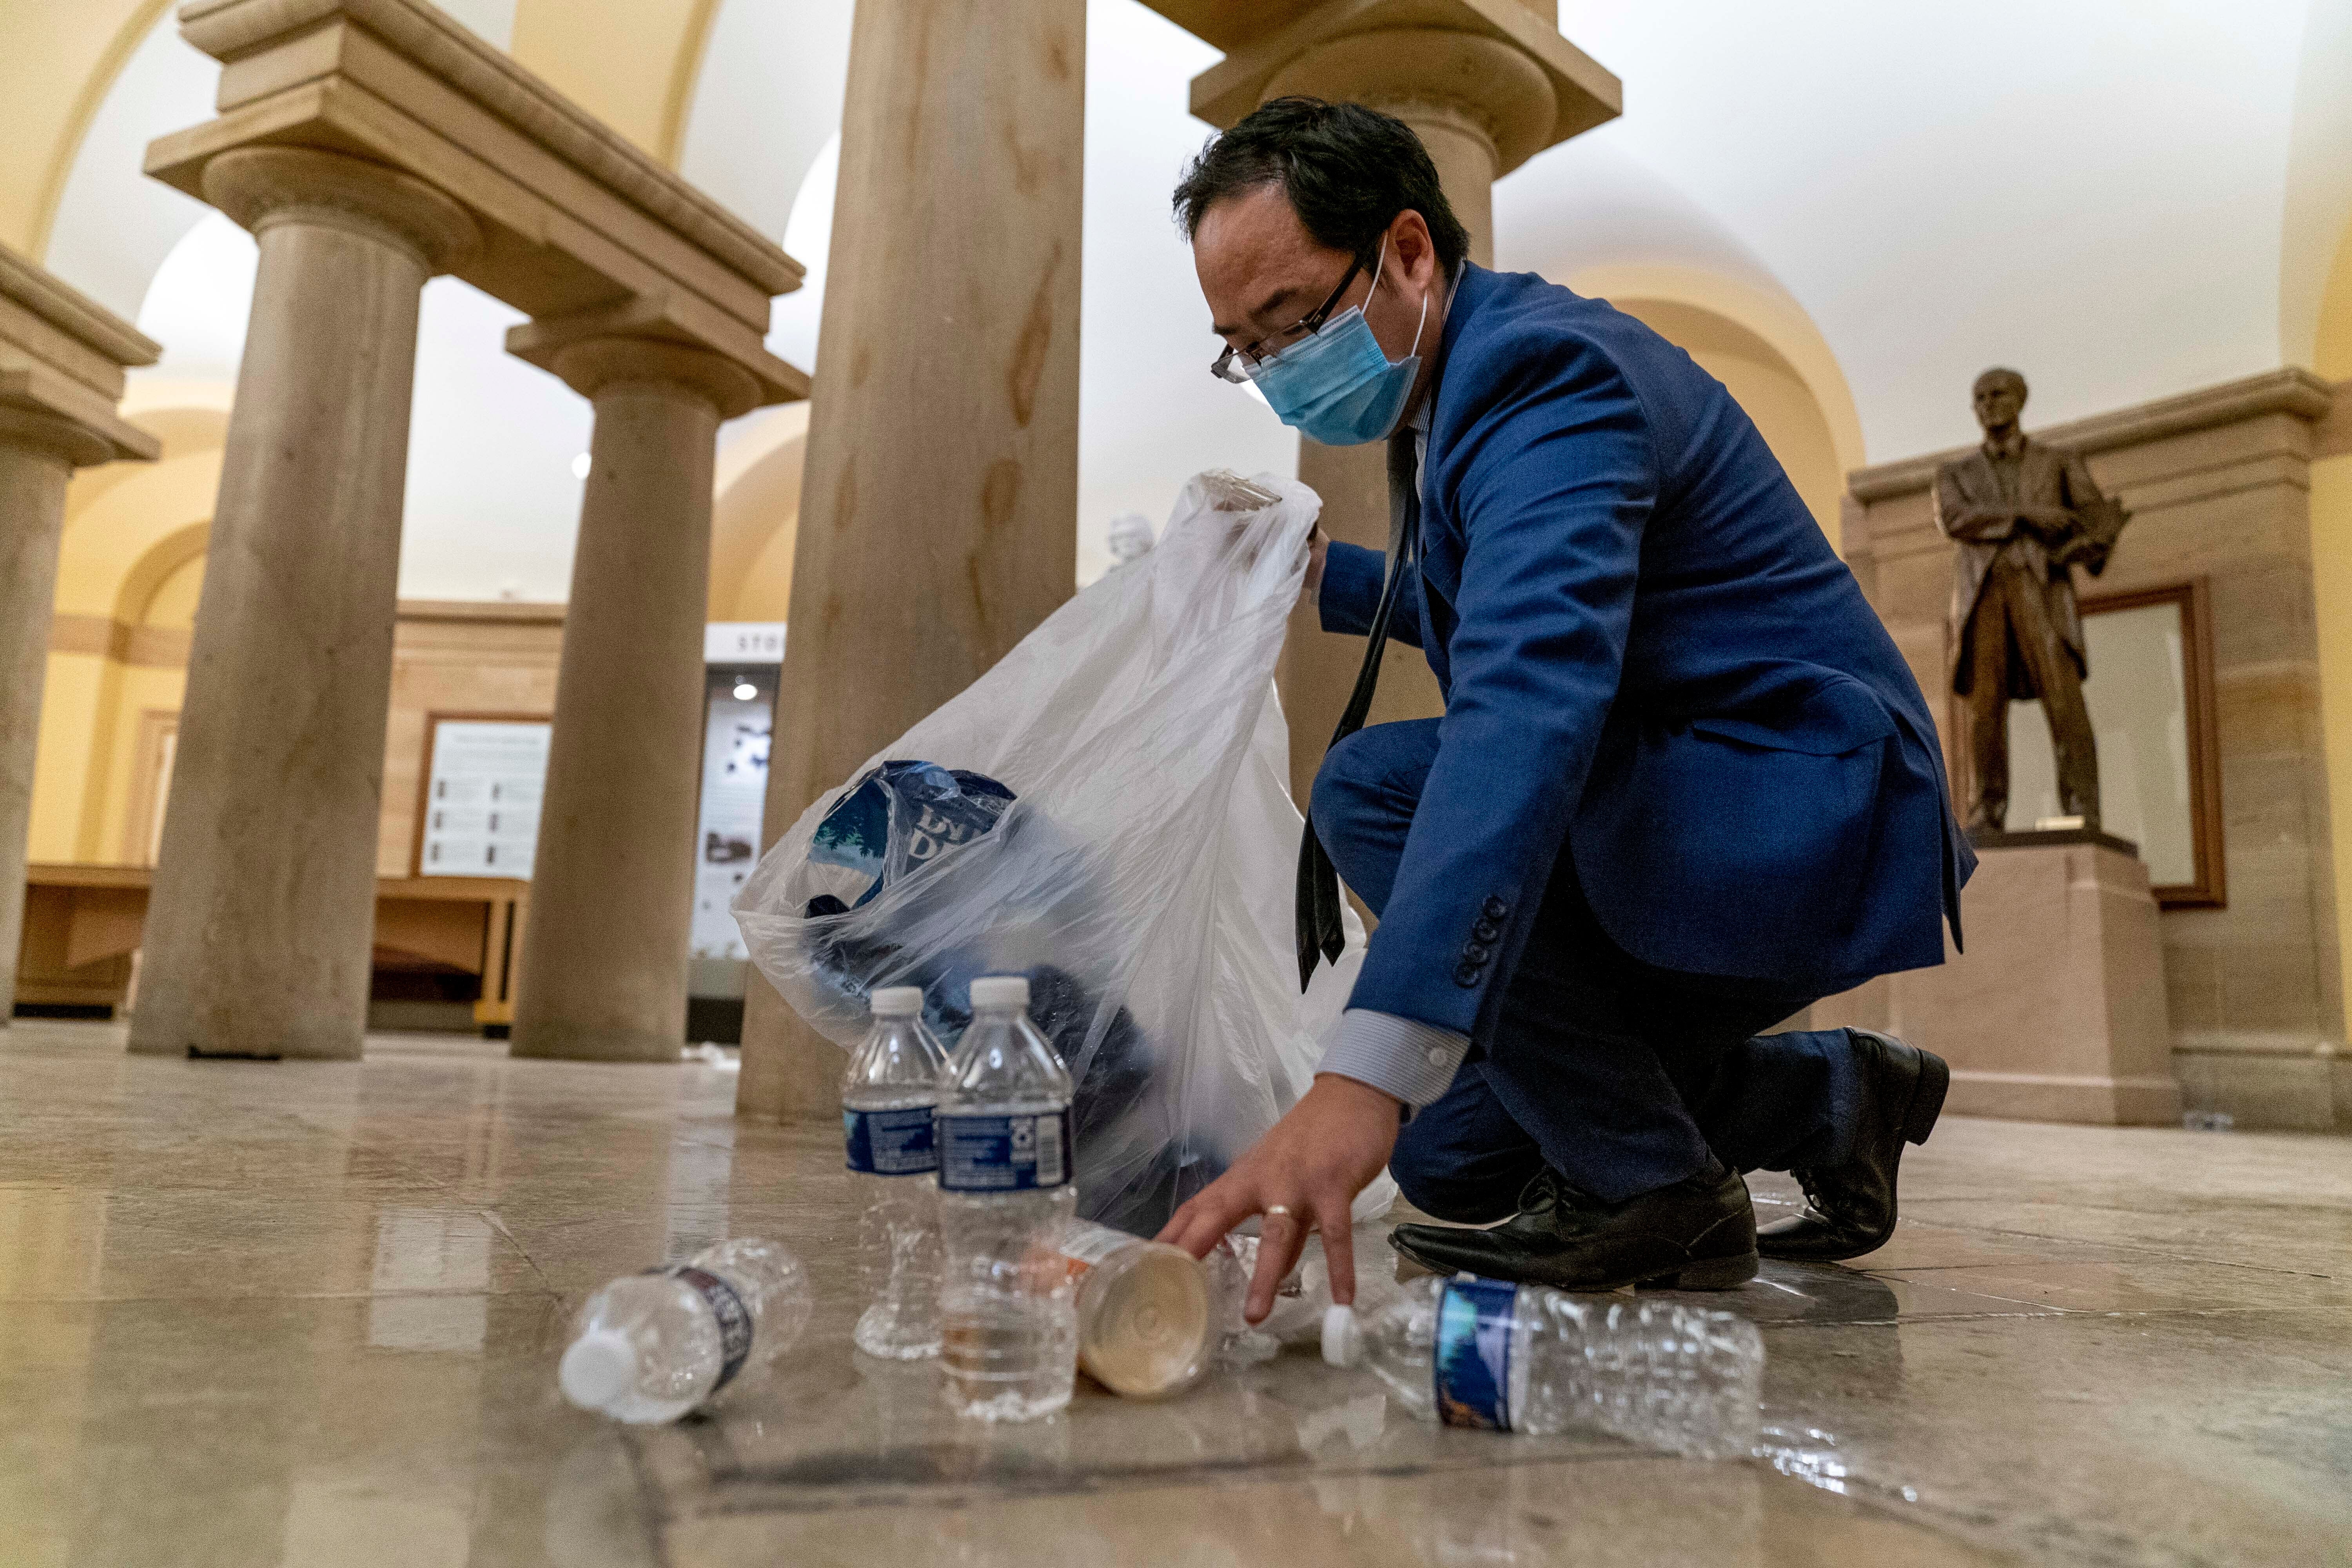 Rep Andy Kim, D-NJ, cleans up debris and trash on the morning of 7 Janurary, 2021, after rioters stormed the Capitol